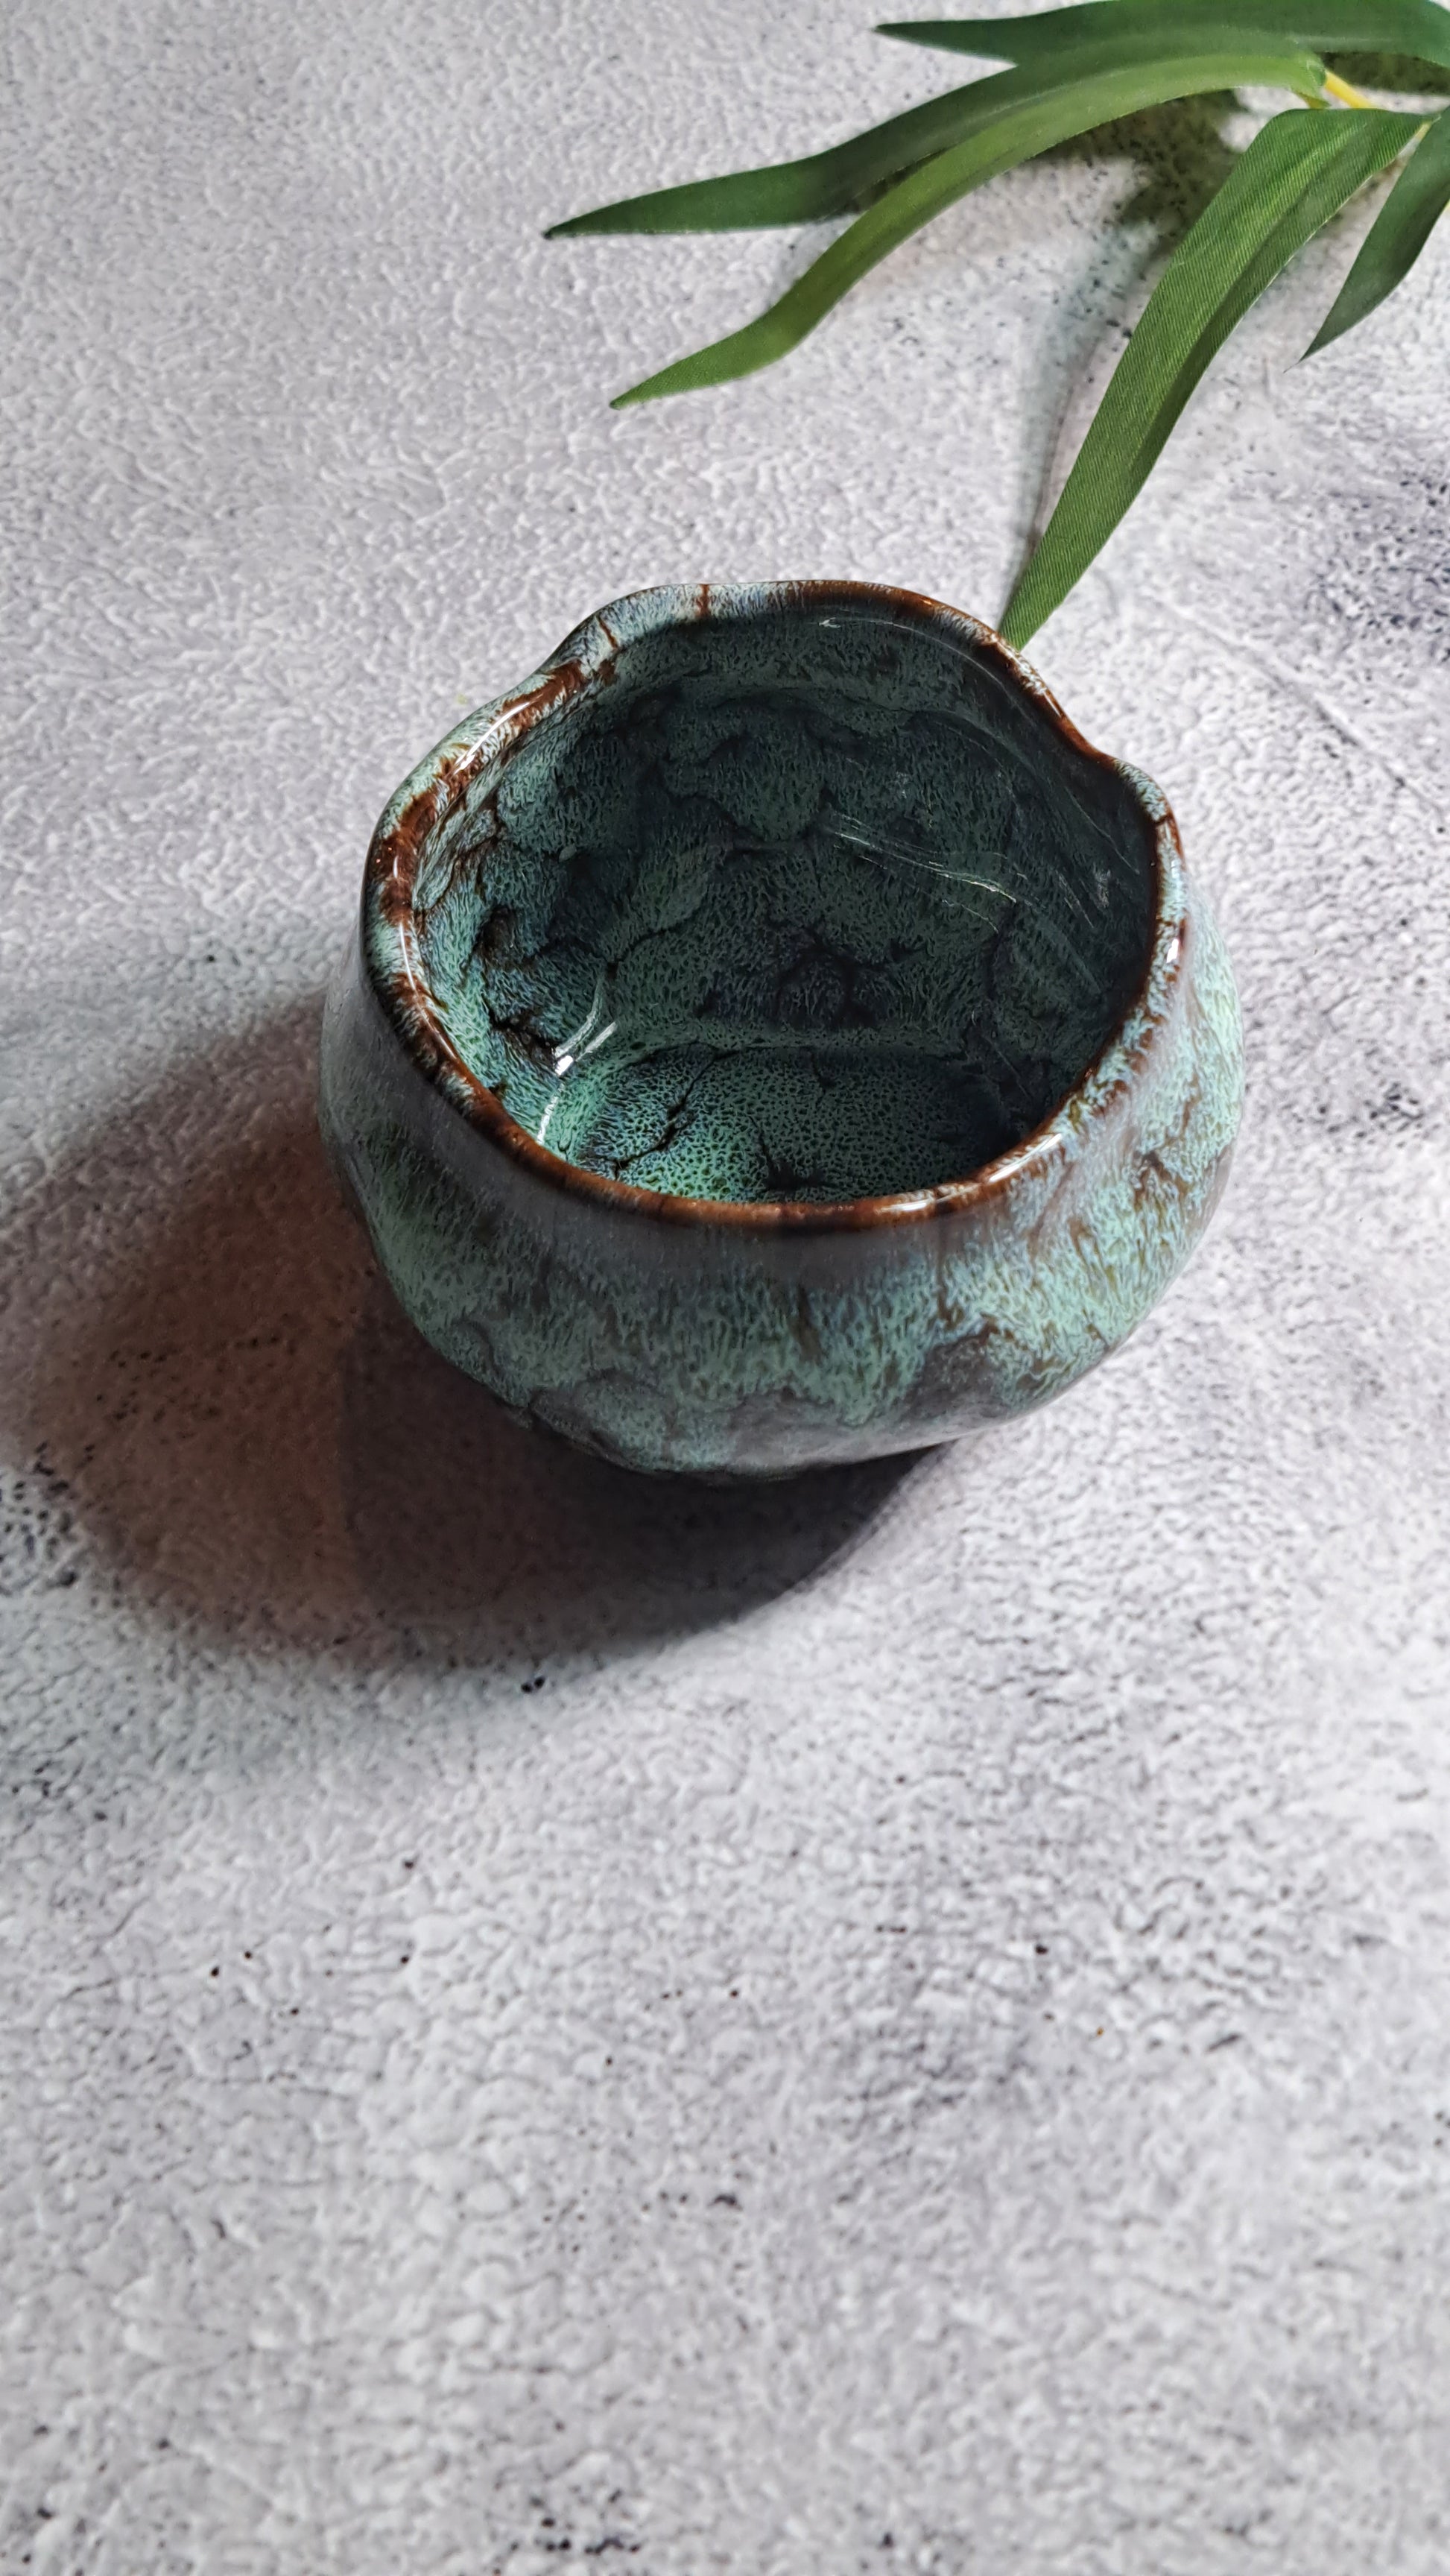 Ceramic Blue Brown Matcha Tea Cup - Cyan Glaze 160 ml. An authentic, hand-crafted ceramic matcha tea cup, made for the true matcha lover who wants to recreate a traditional matcha ceremony.